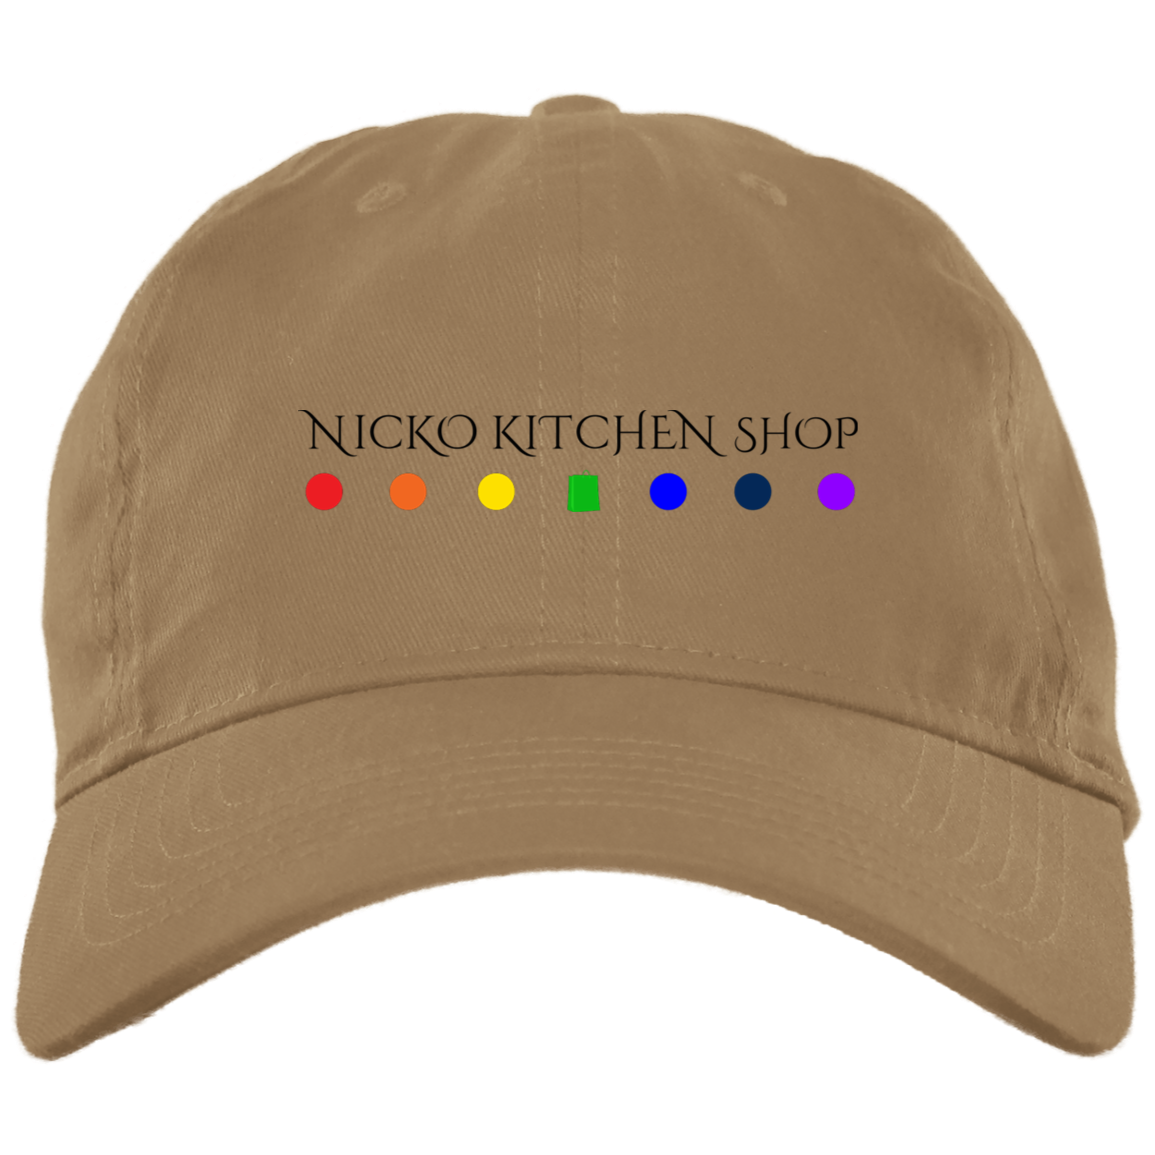 Nicko Kitchen Shop Brushed Twill Unstructured Dad Cap